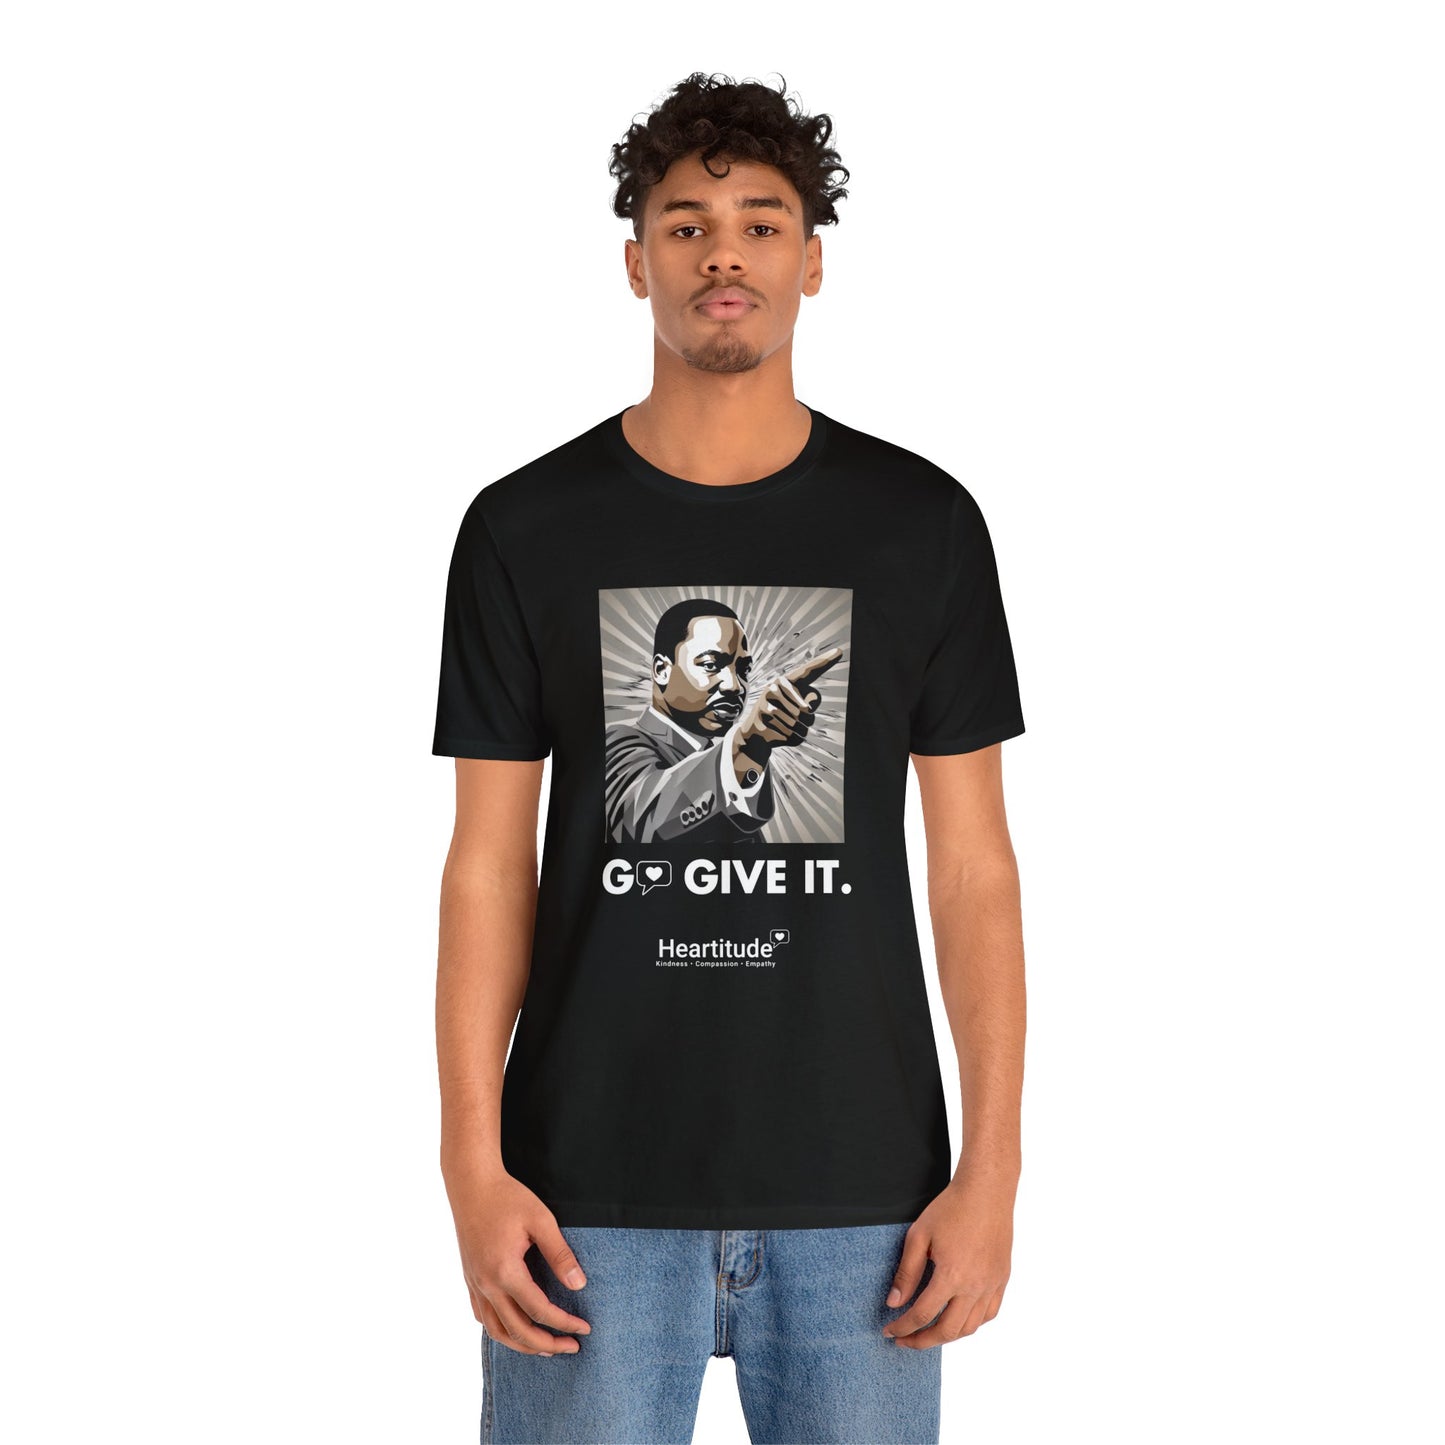 Go Give It with Dr. King Tee (50% to charity)